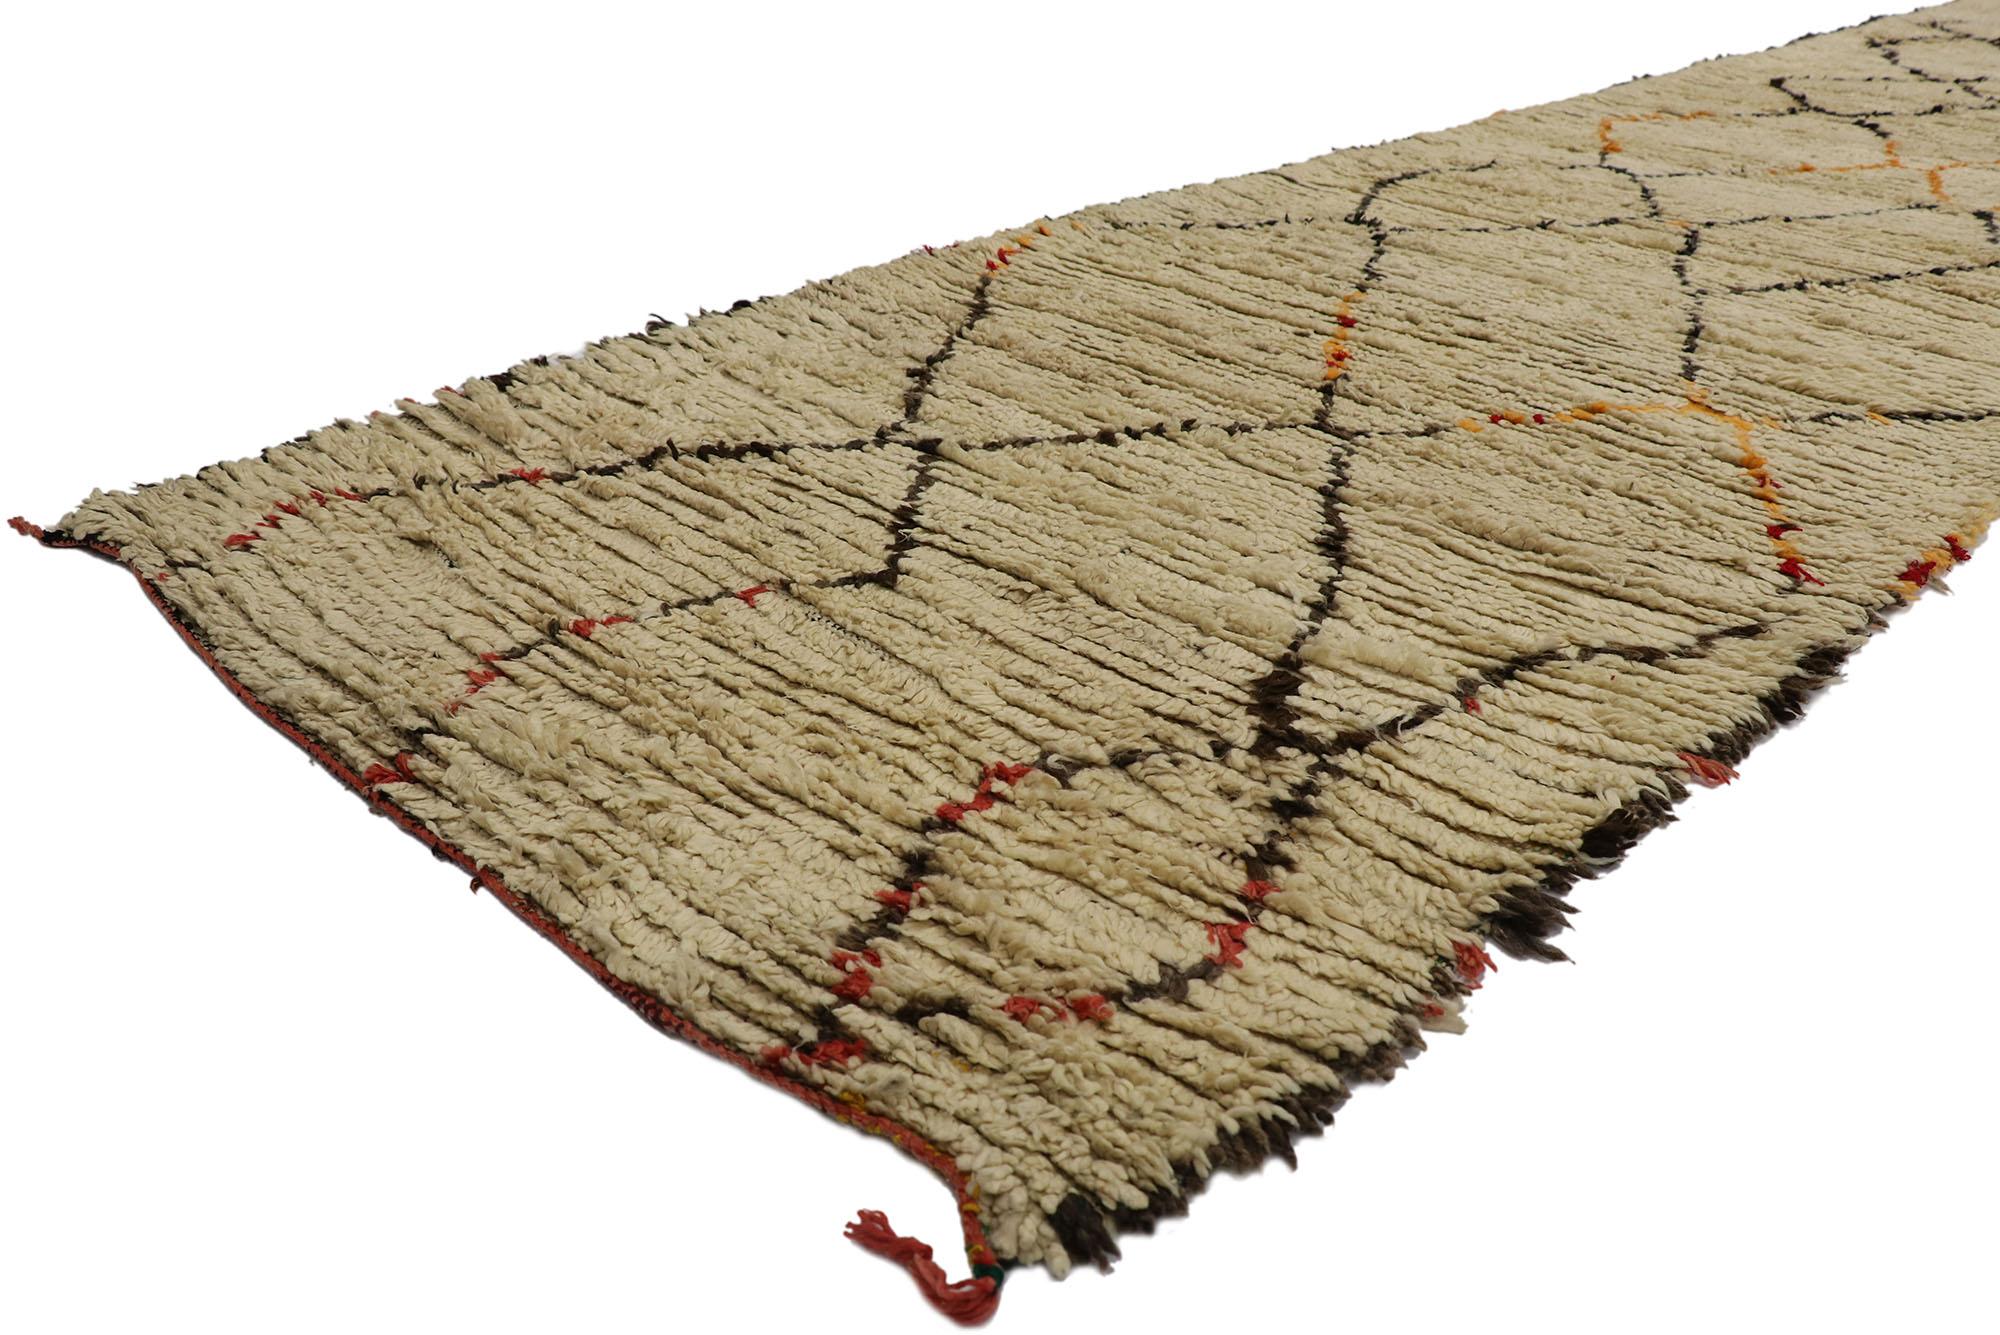 21381 Vintage Berber Azilal Moroccan runner with Tribal Style 03'10 x 16'08. With its simplicity, plush pile and tribal style, this hand knotted wool vintage Berber Moroccan Azilal runner is a captivating vision of woven beauty. It features a